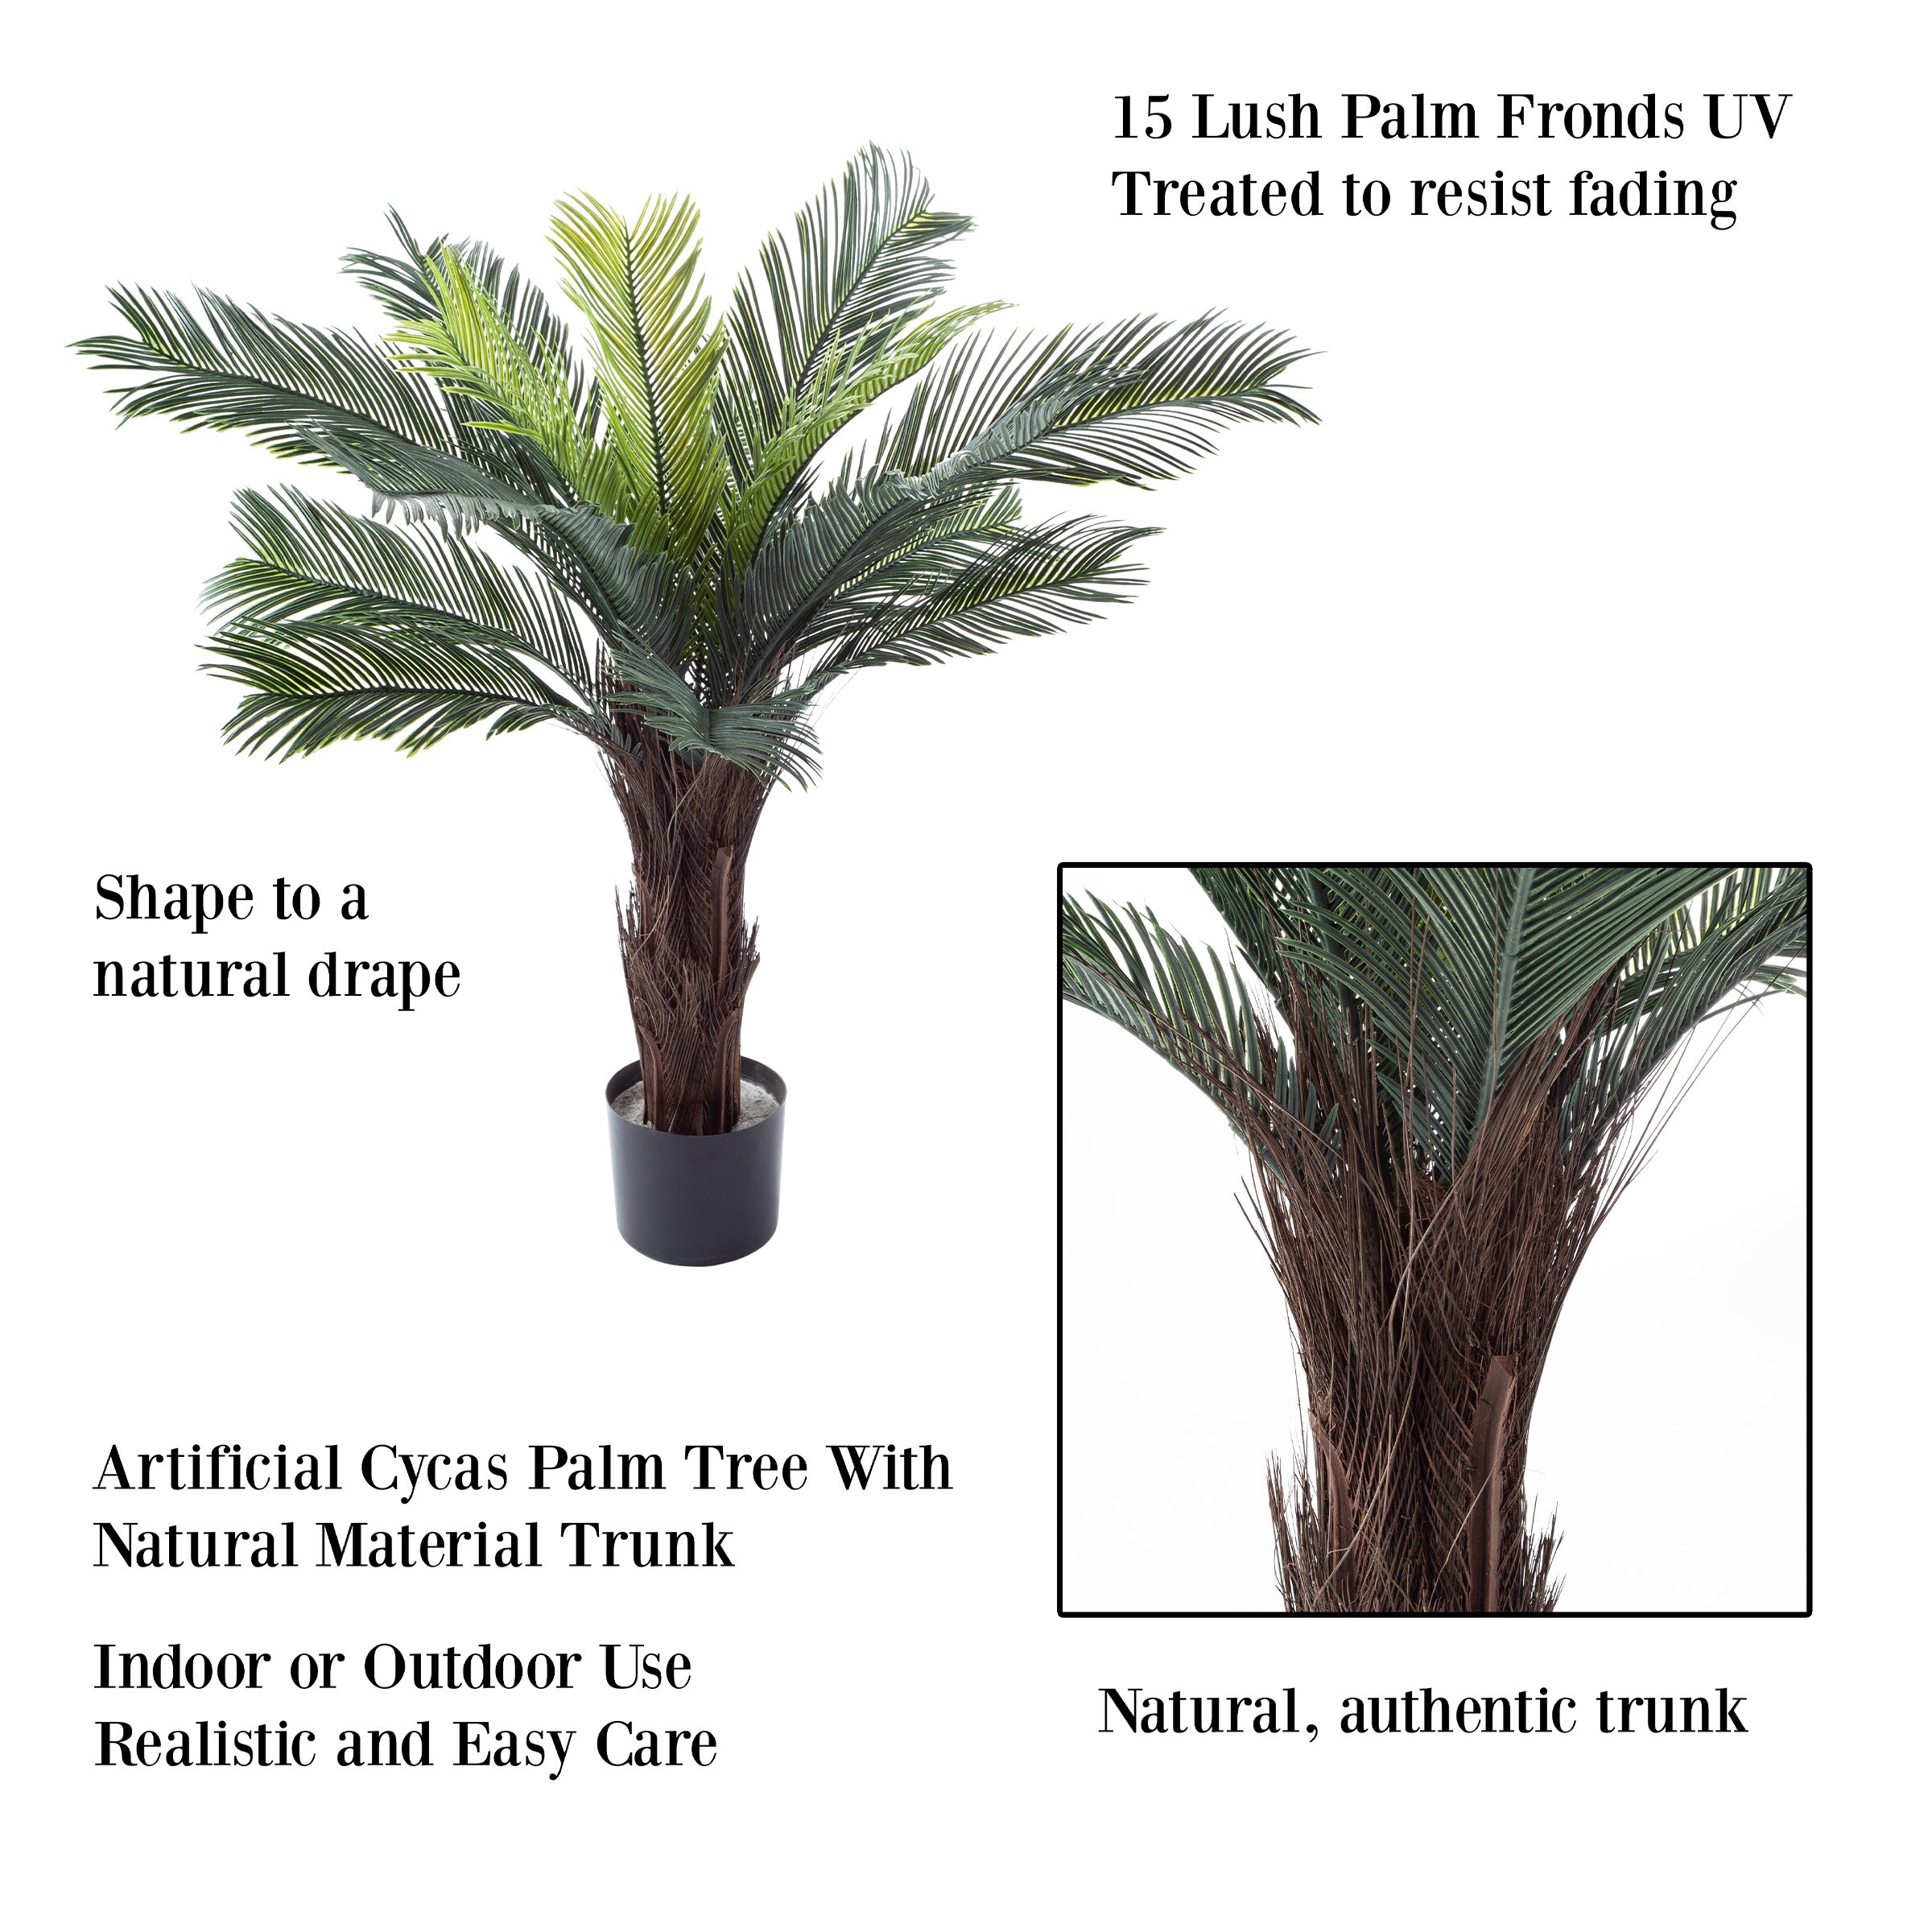 Cycas Palm Pool Patio Home Office Shade Tree UV Resistant Indoor/Outdoor 4 ft 